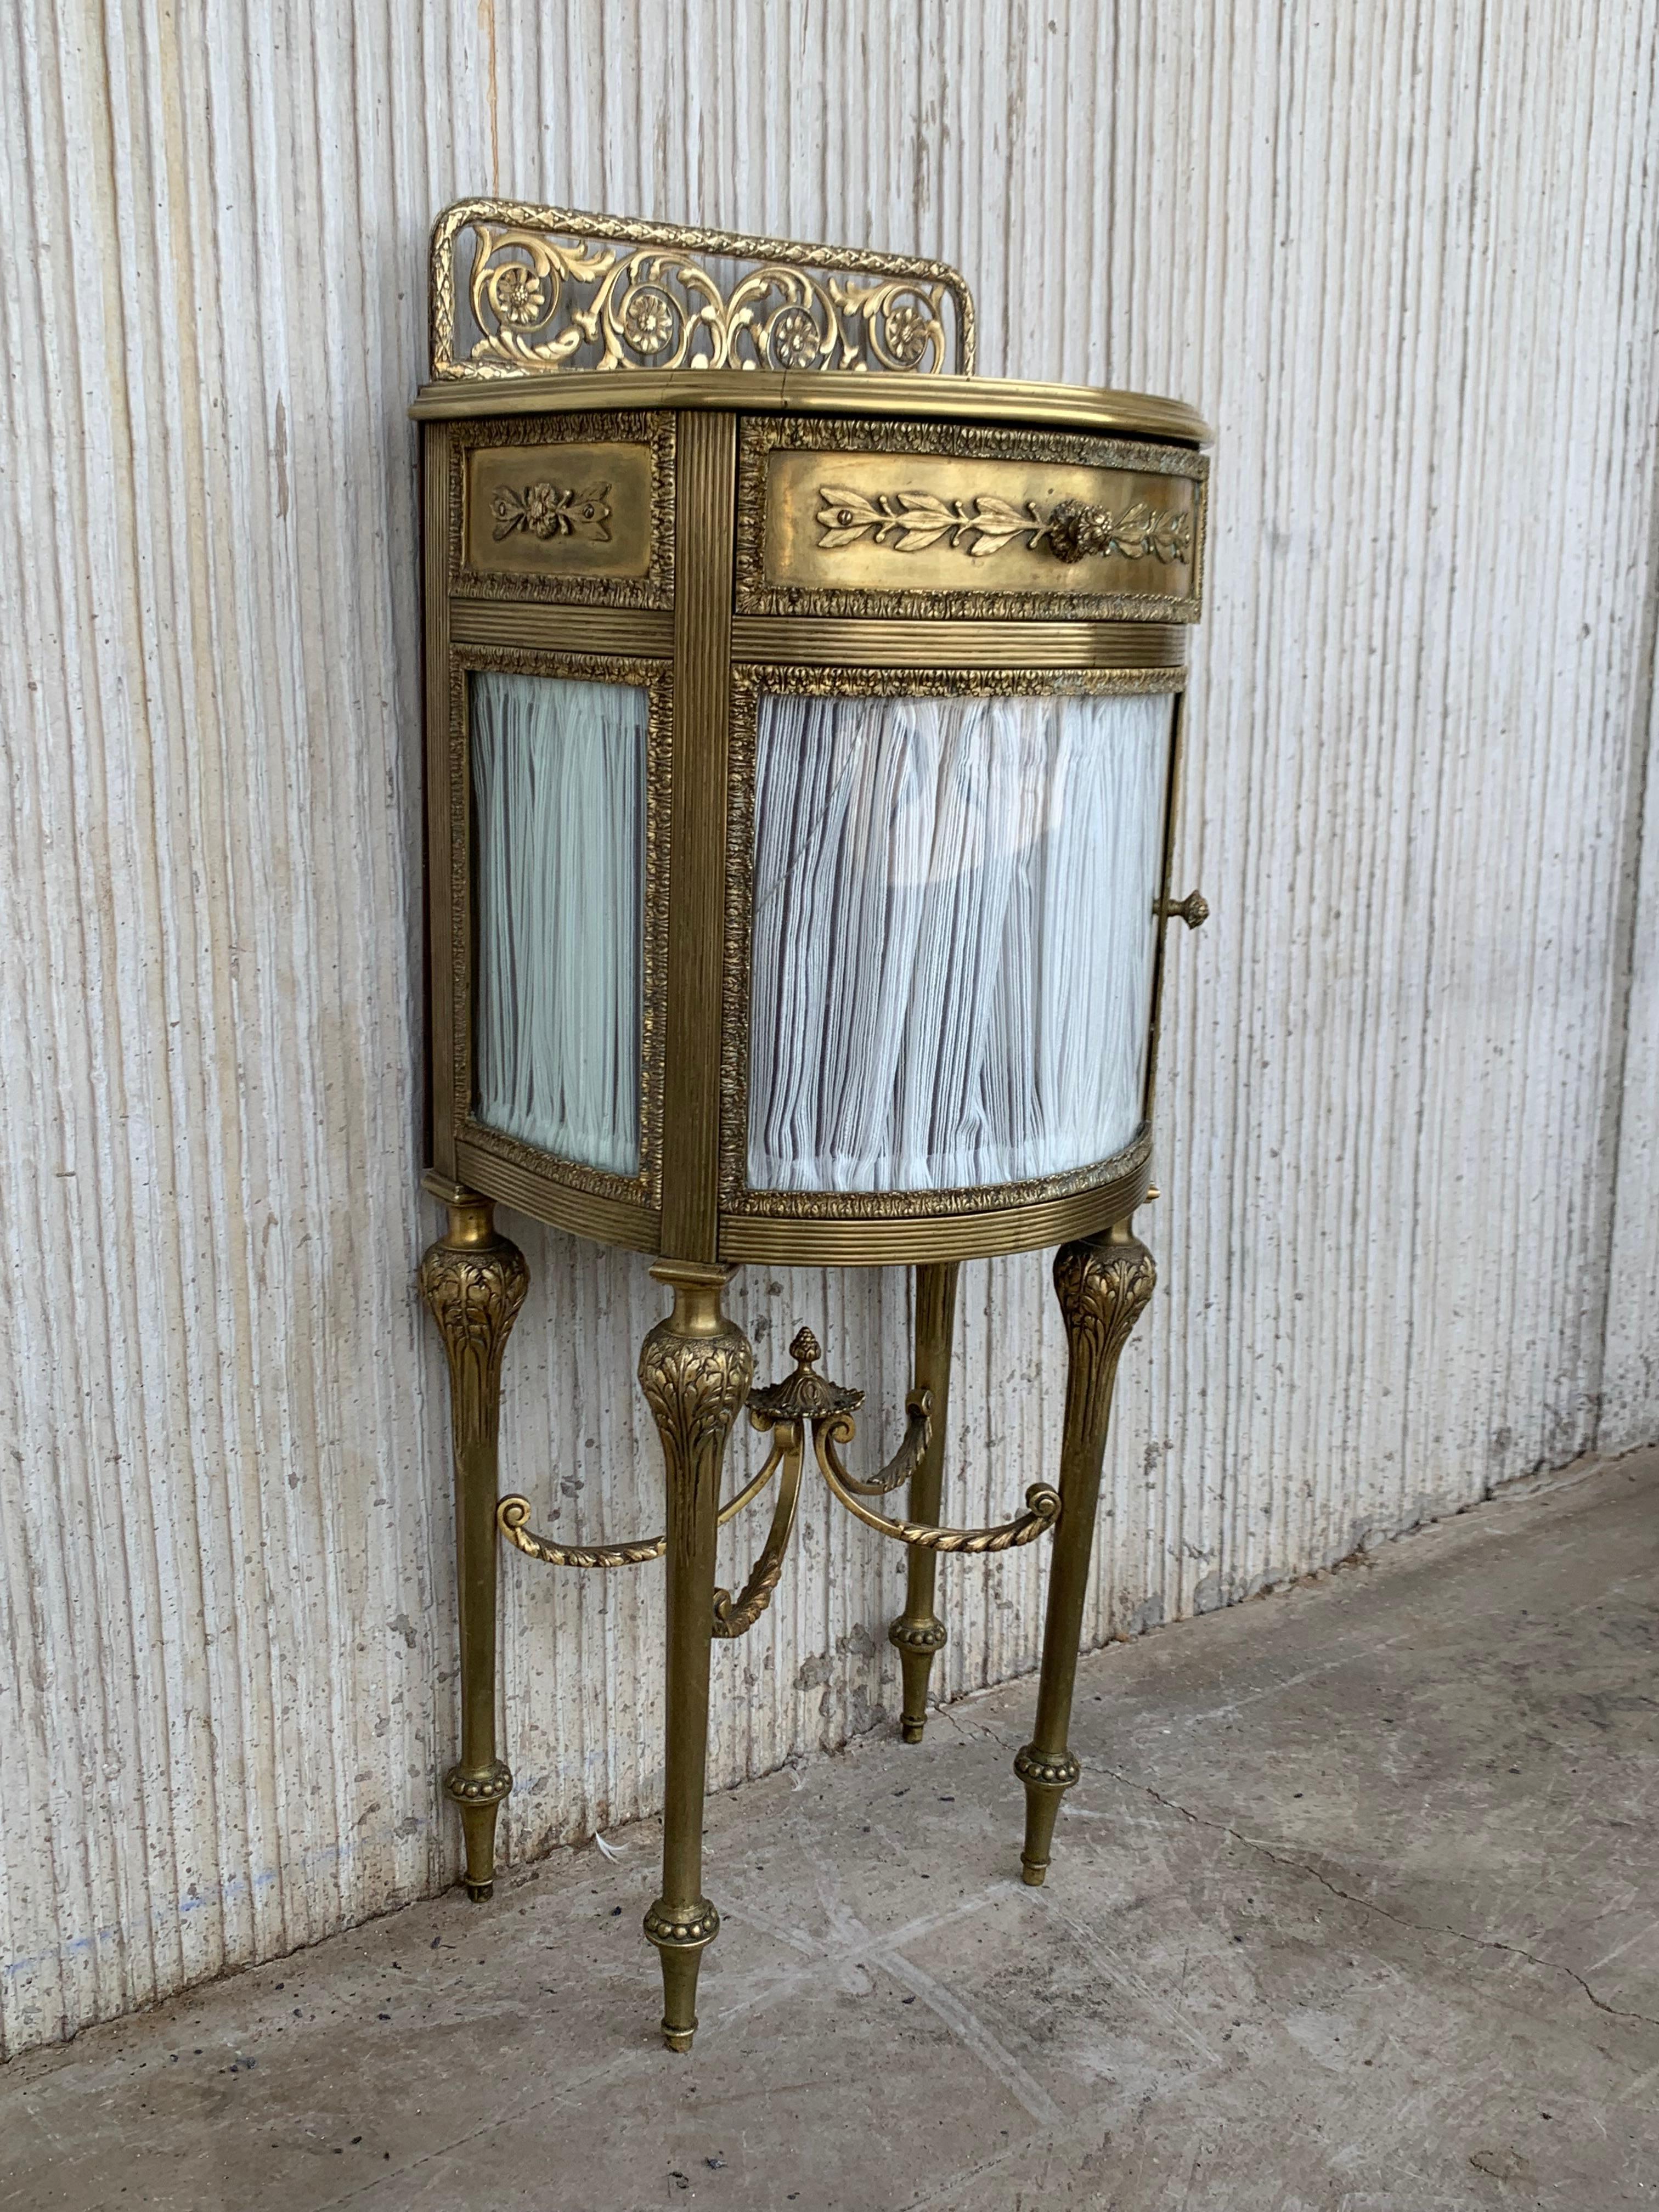 19th century pair of bronze nightstands with curved glass door and drawers.

This early antique Louis XVI style bronze or glass vitrine cabinet or nightstand is simply stunning and constructed of the finest quality. The bronze mounts of fine form